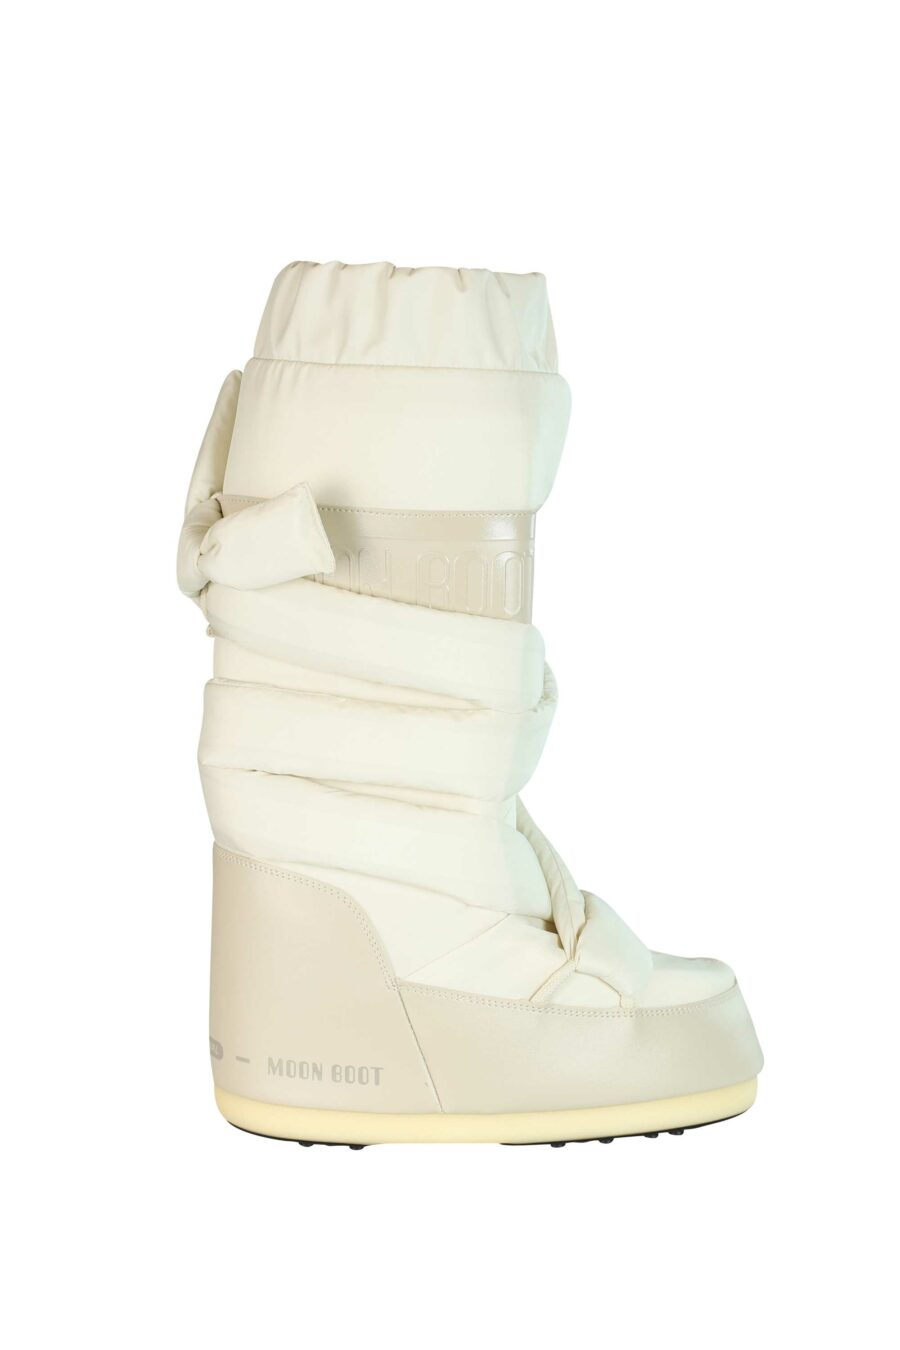 White boots with brown snow brown logo - 8050459950229